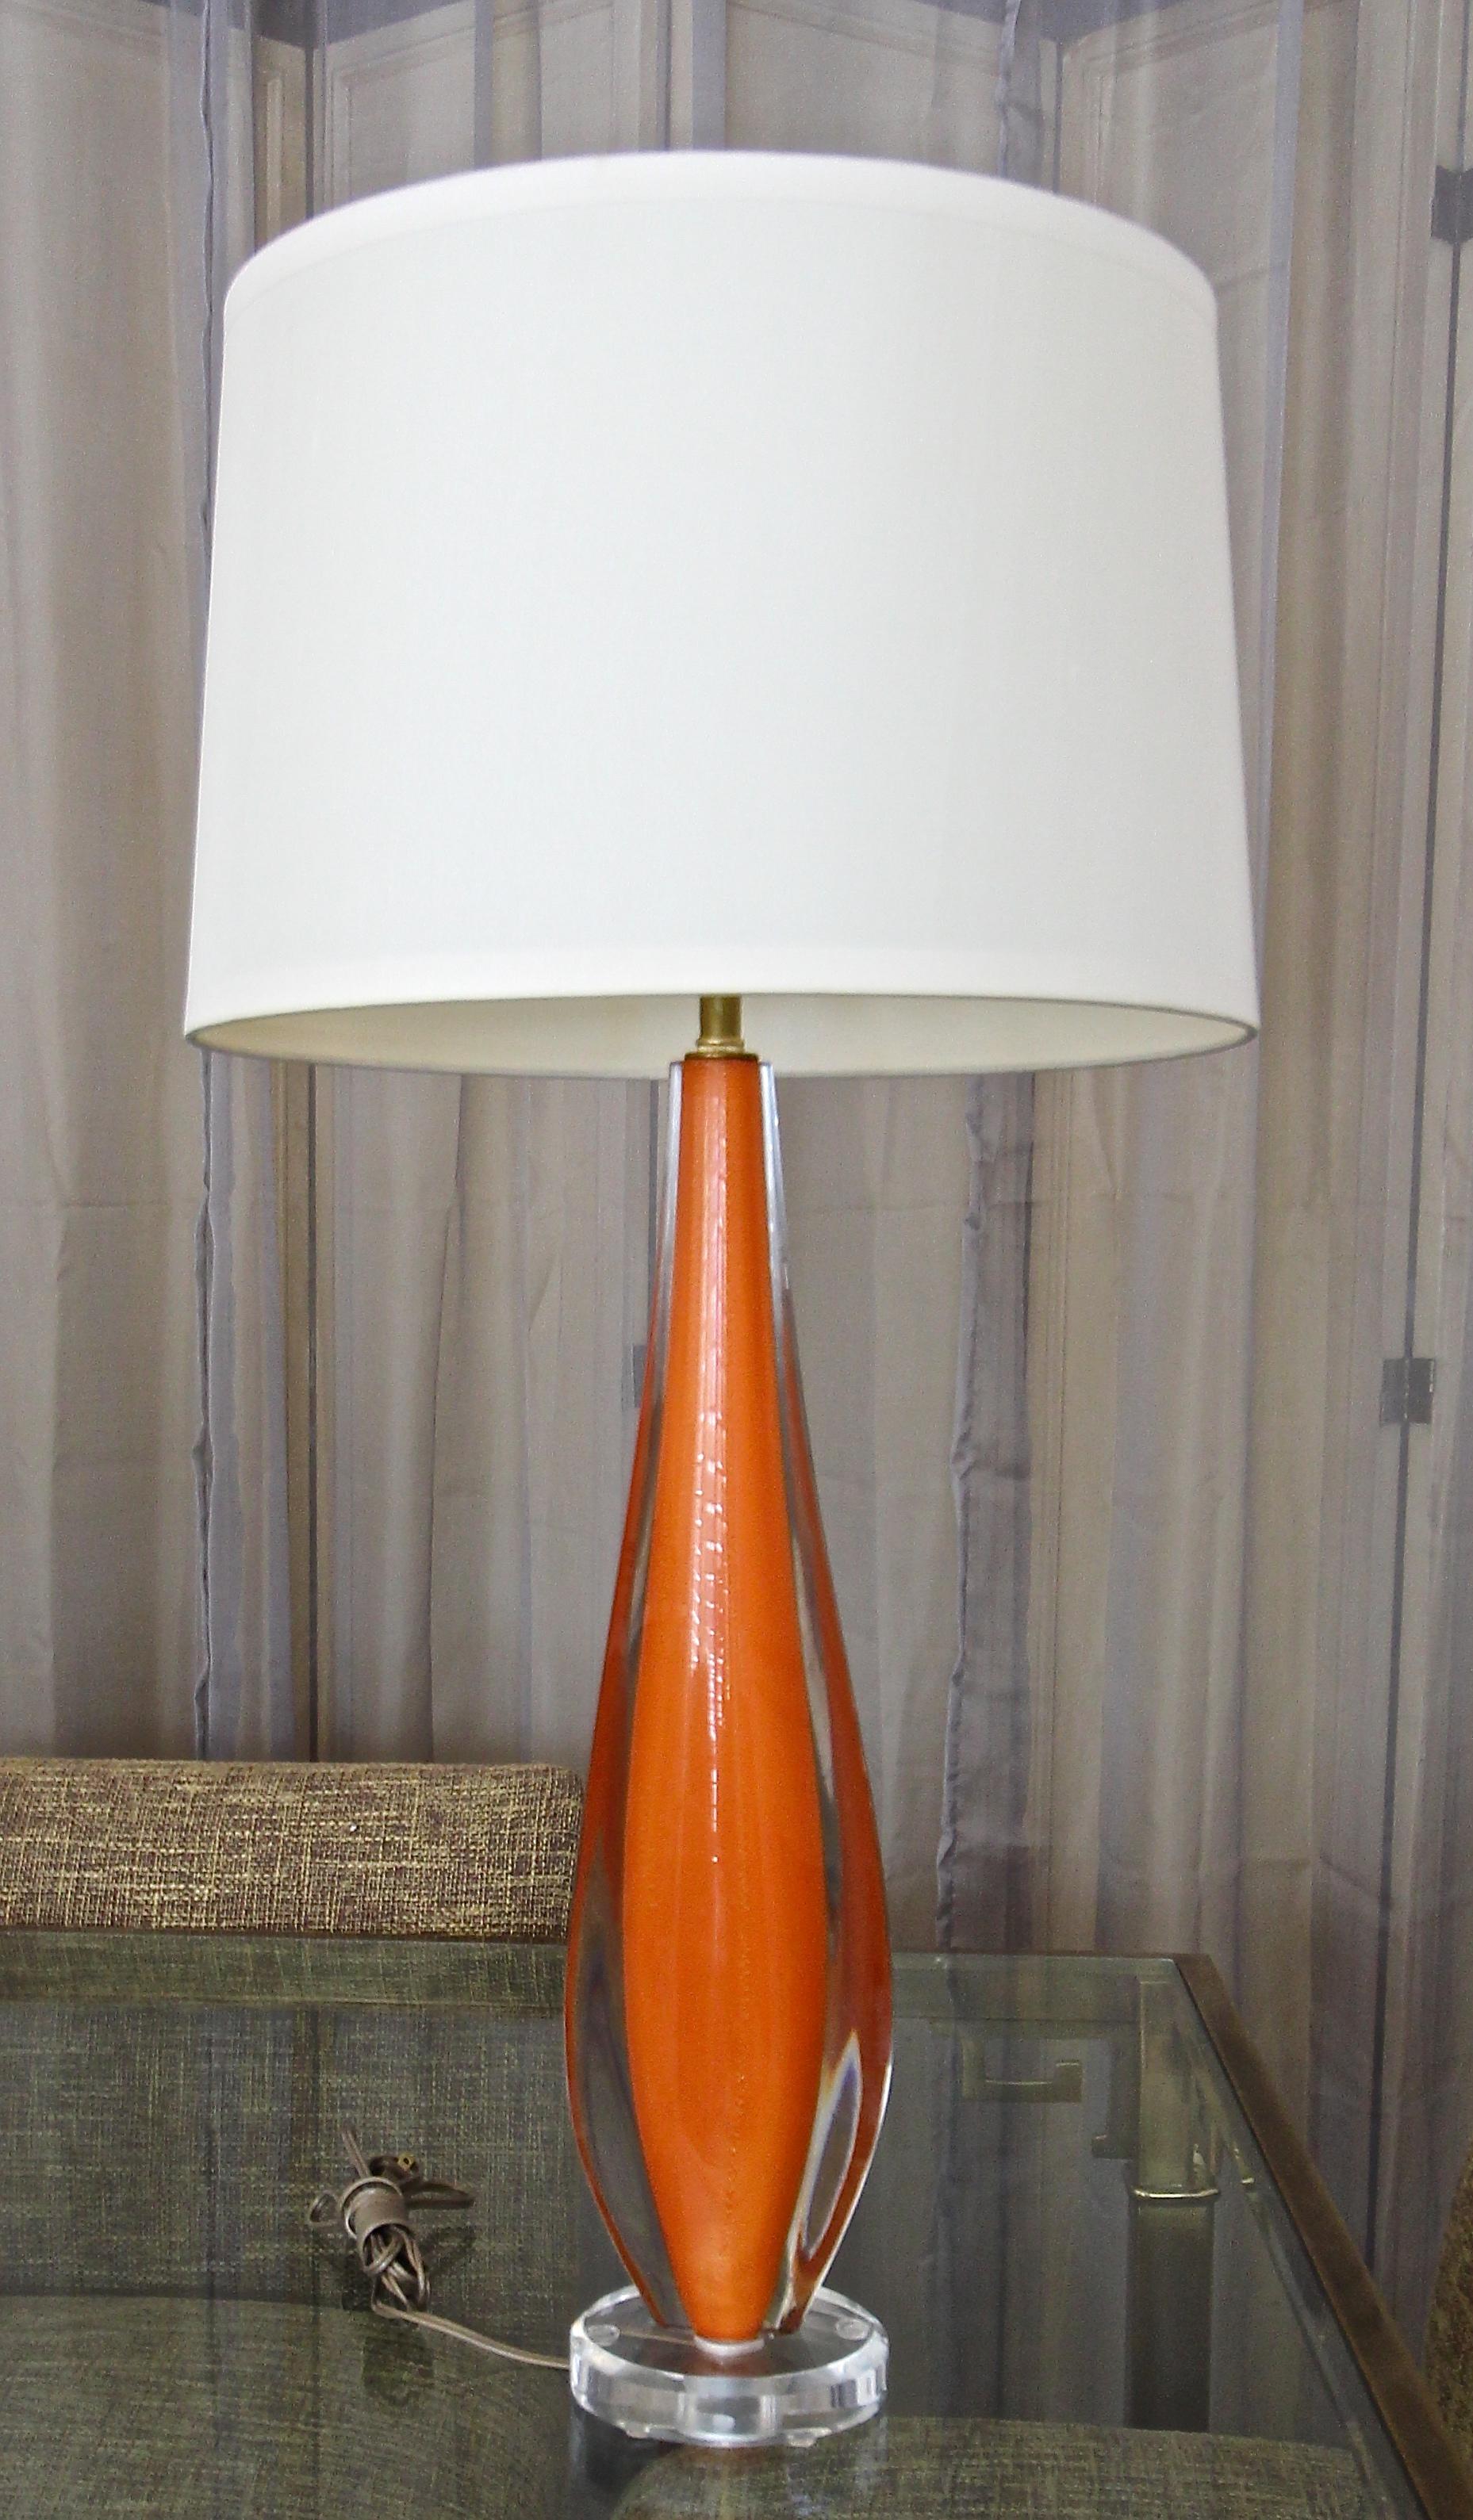 Single Italian hand blown orange colored glass with gold inclusions table lamp by Flavio Poli for Seguso. Mounted on new acrylic base. Newly wired with new solid brass 3-way socket. Measures: Glass portion 19.5